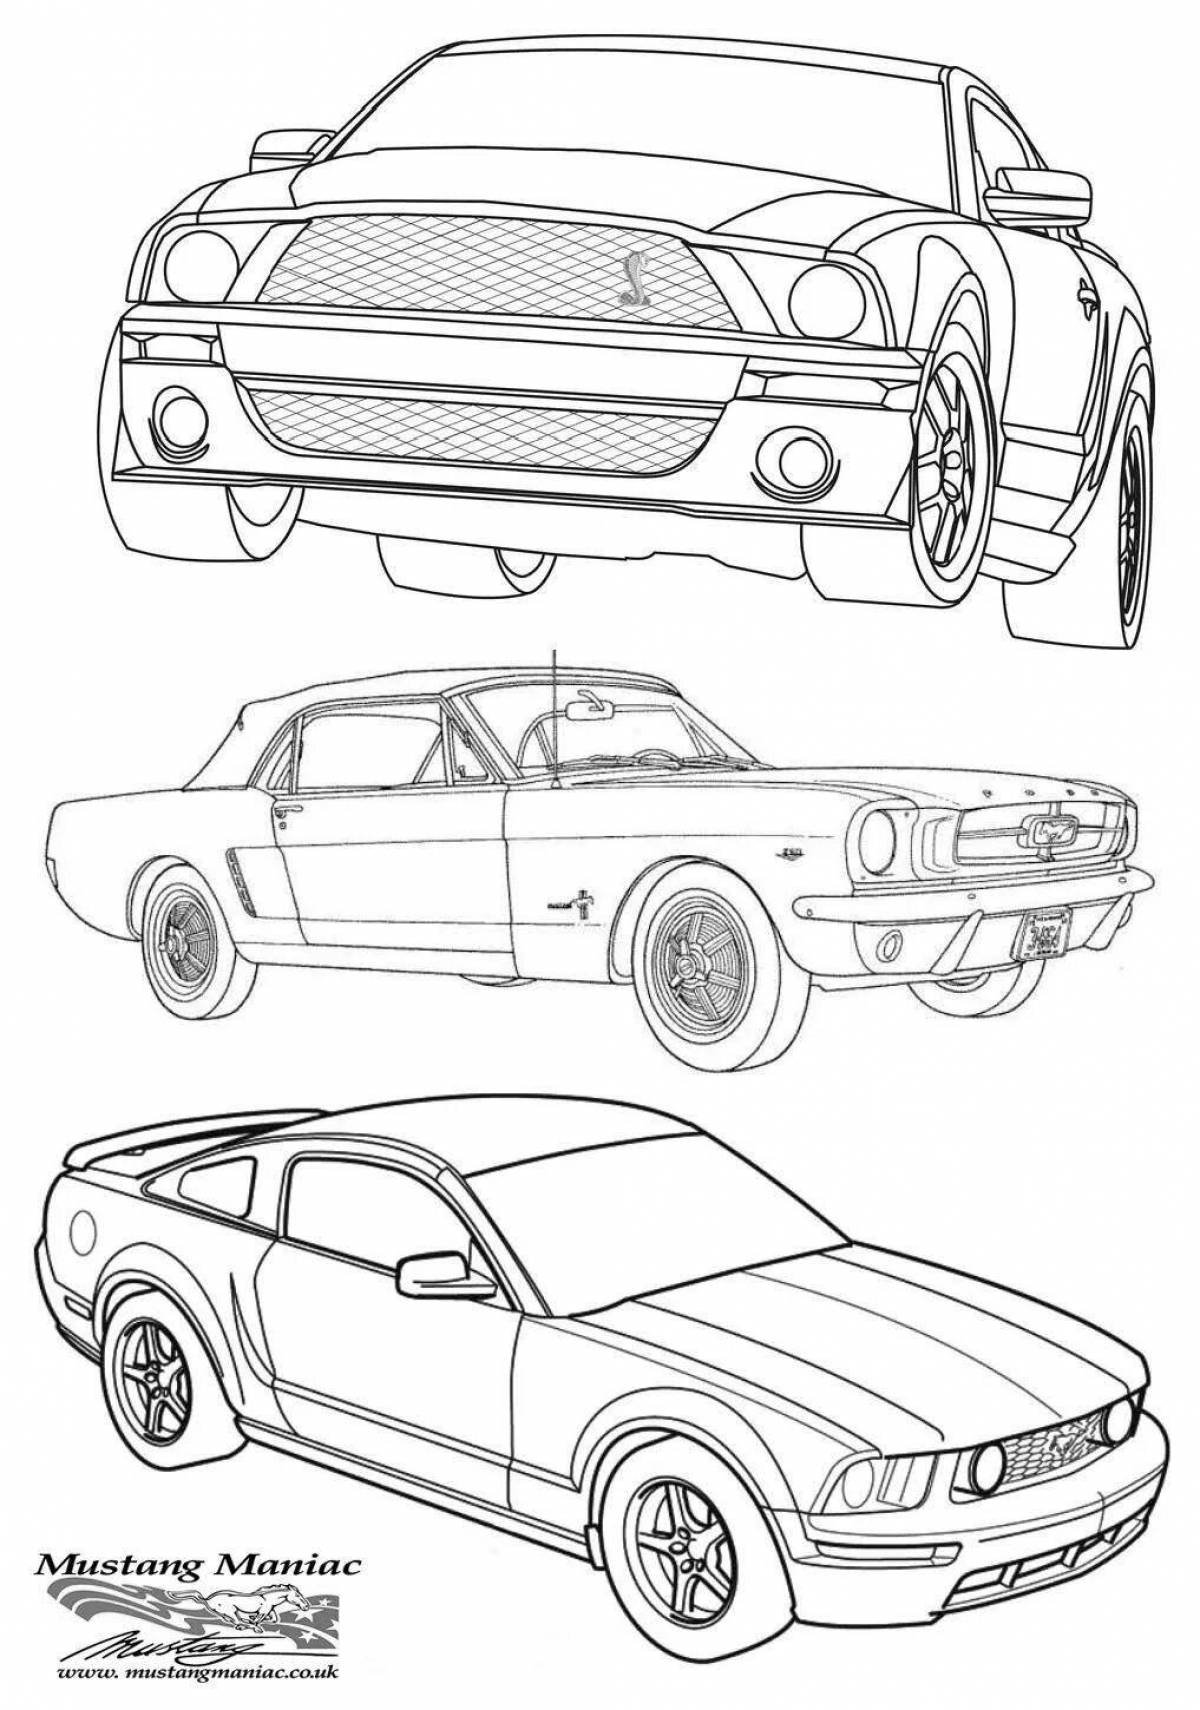 Intriguing mustang coloring for boys